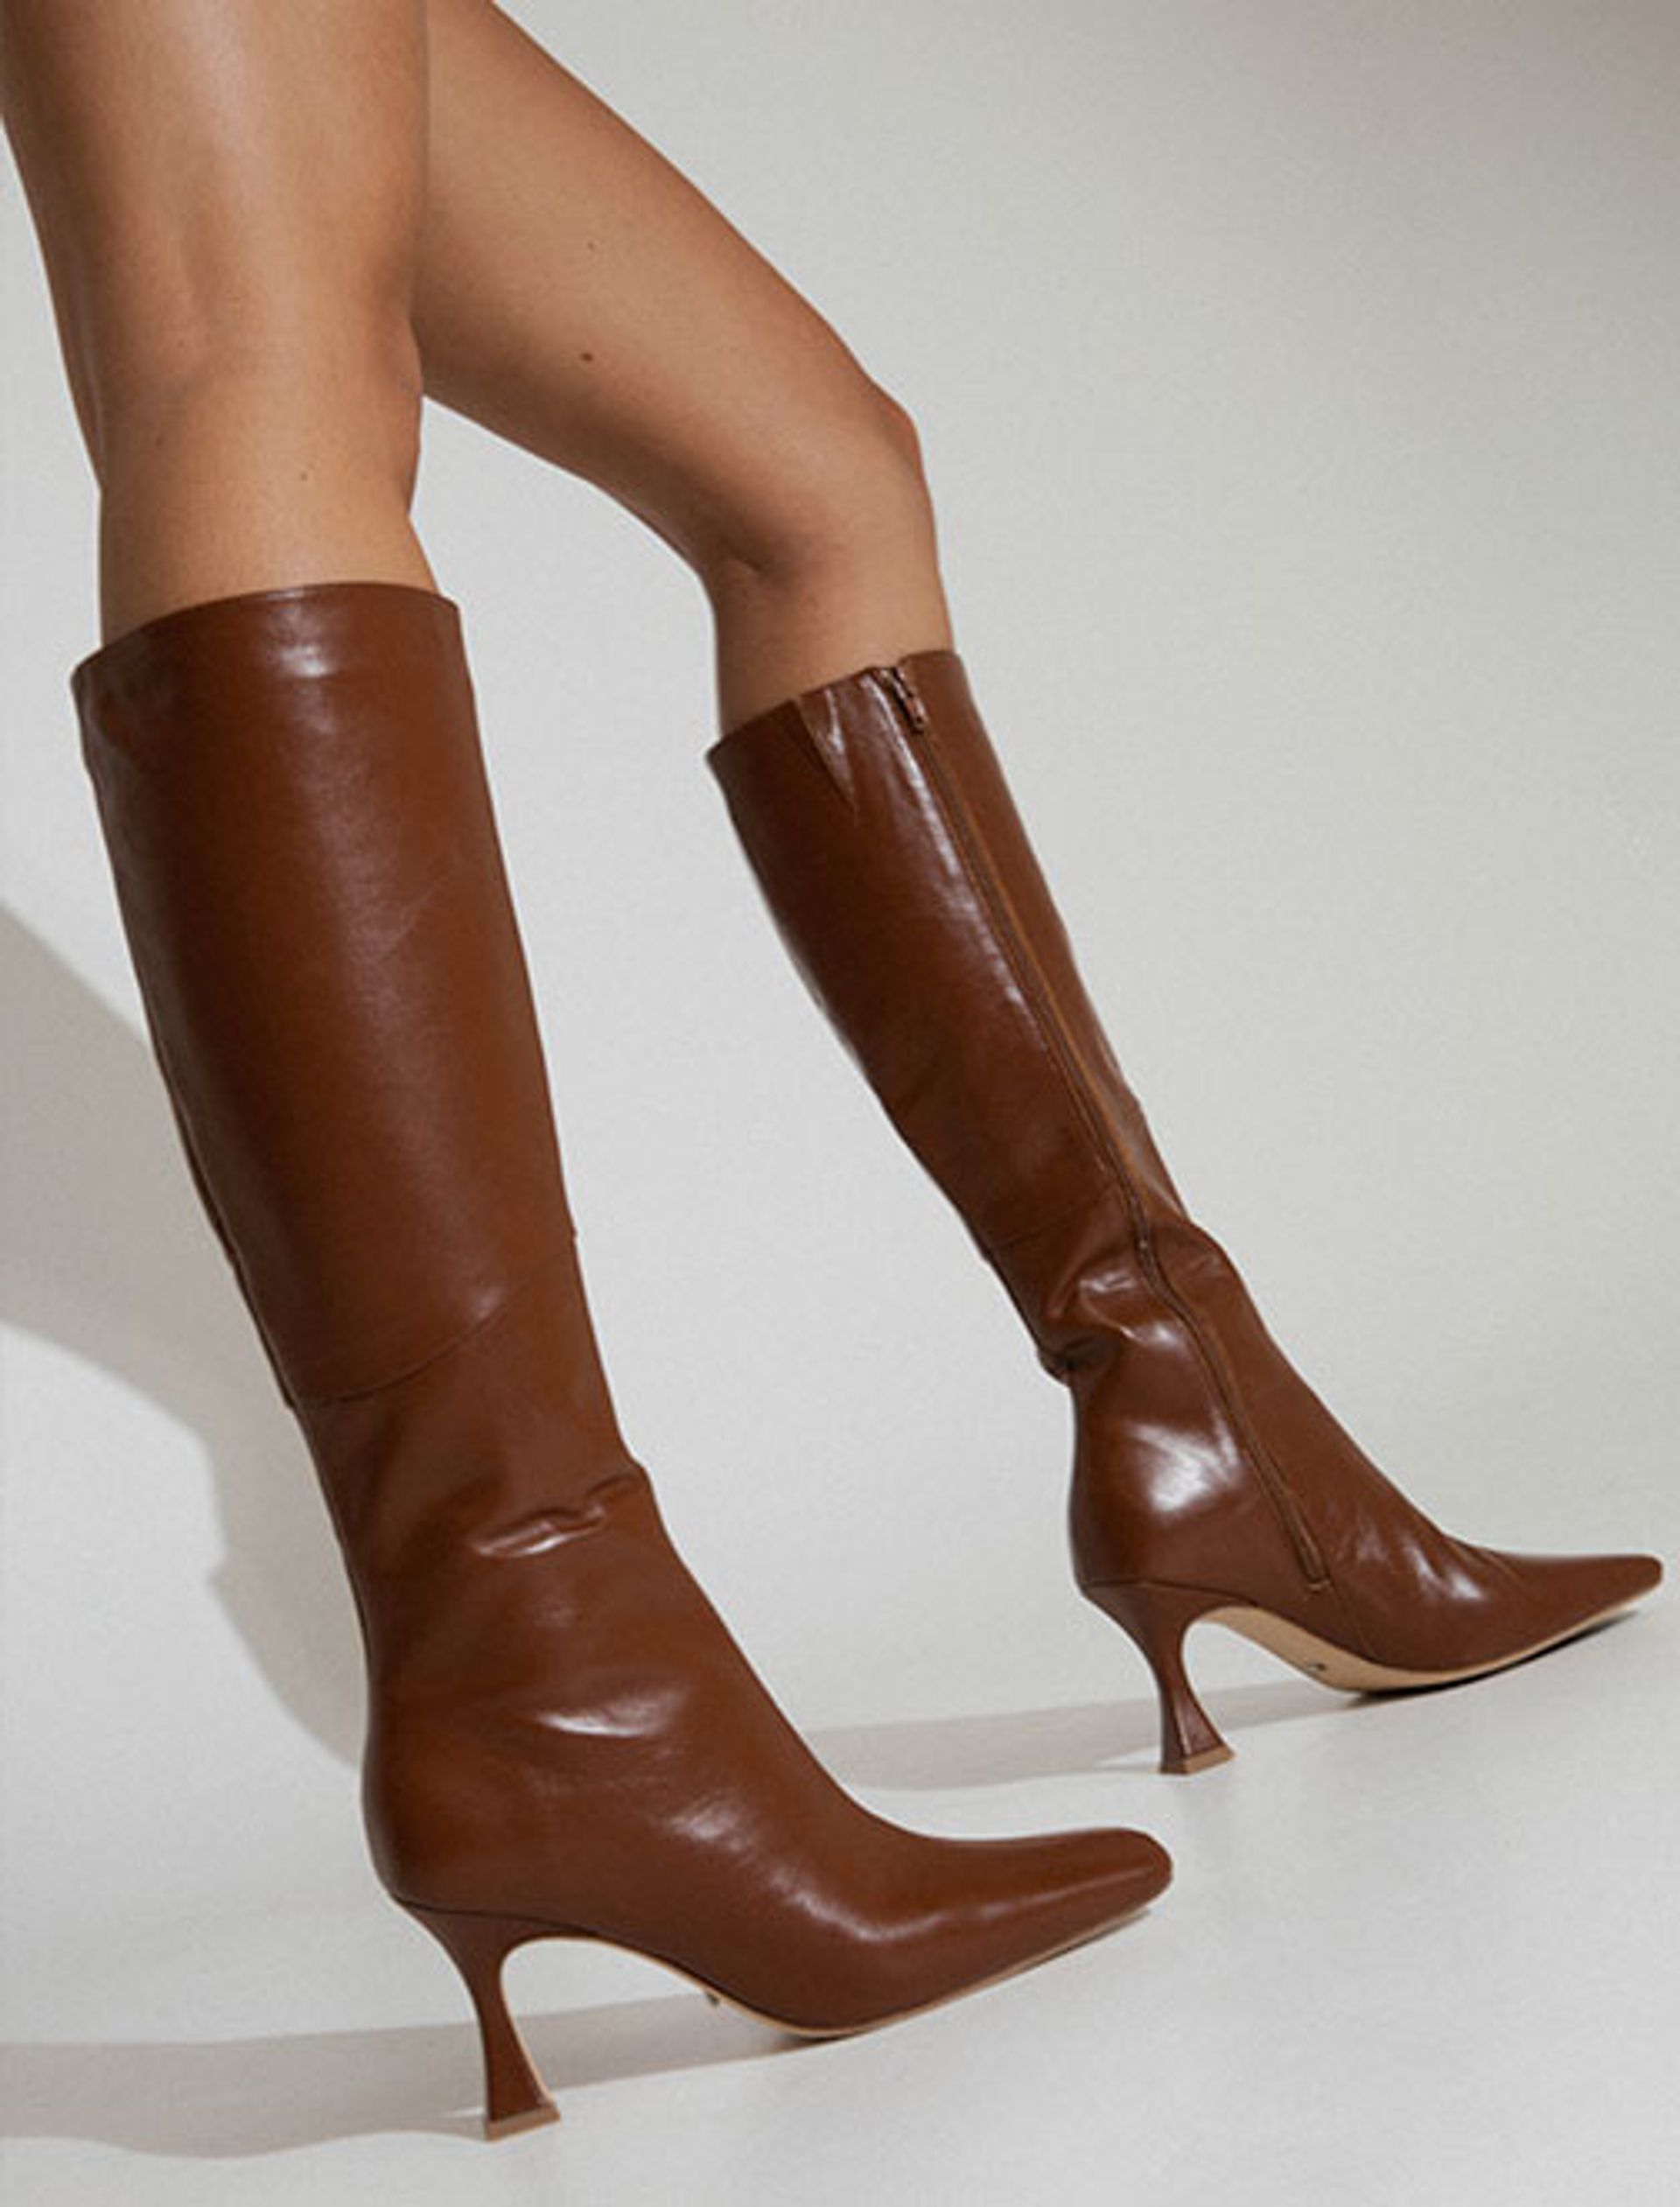 SALE  Boots, Shoes and Accessories